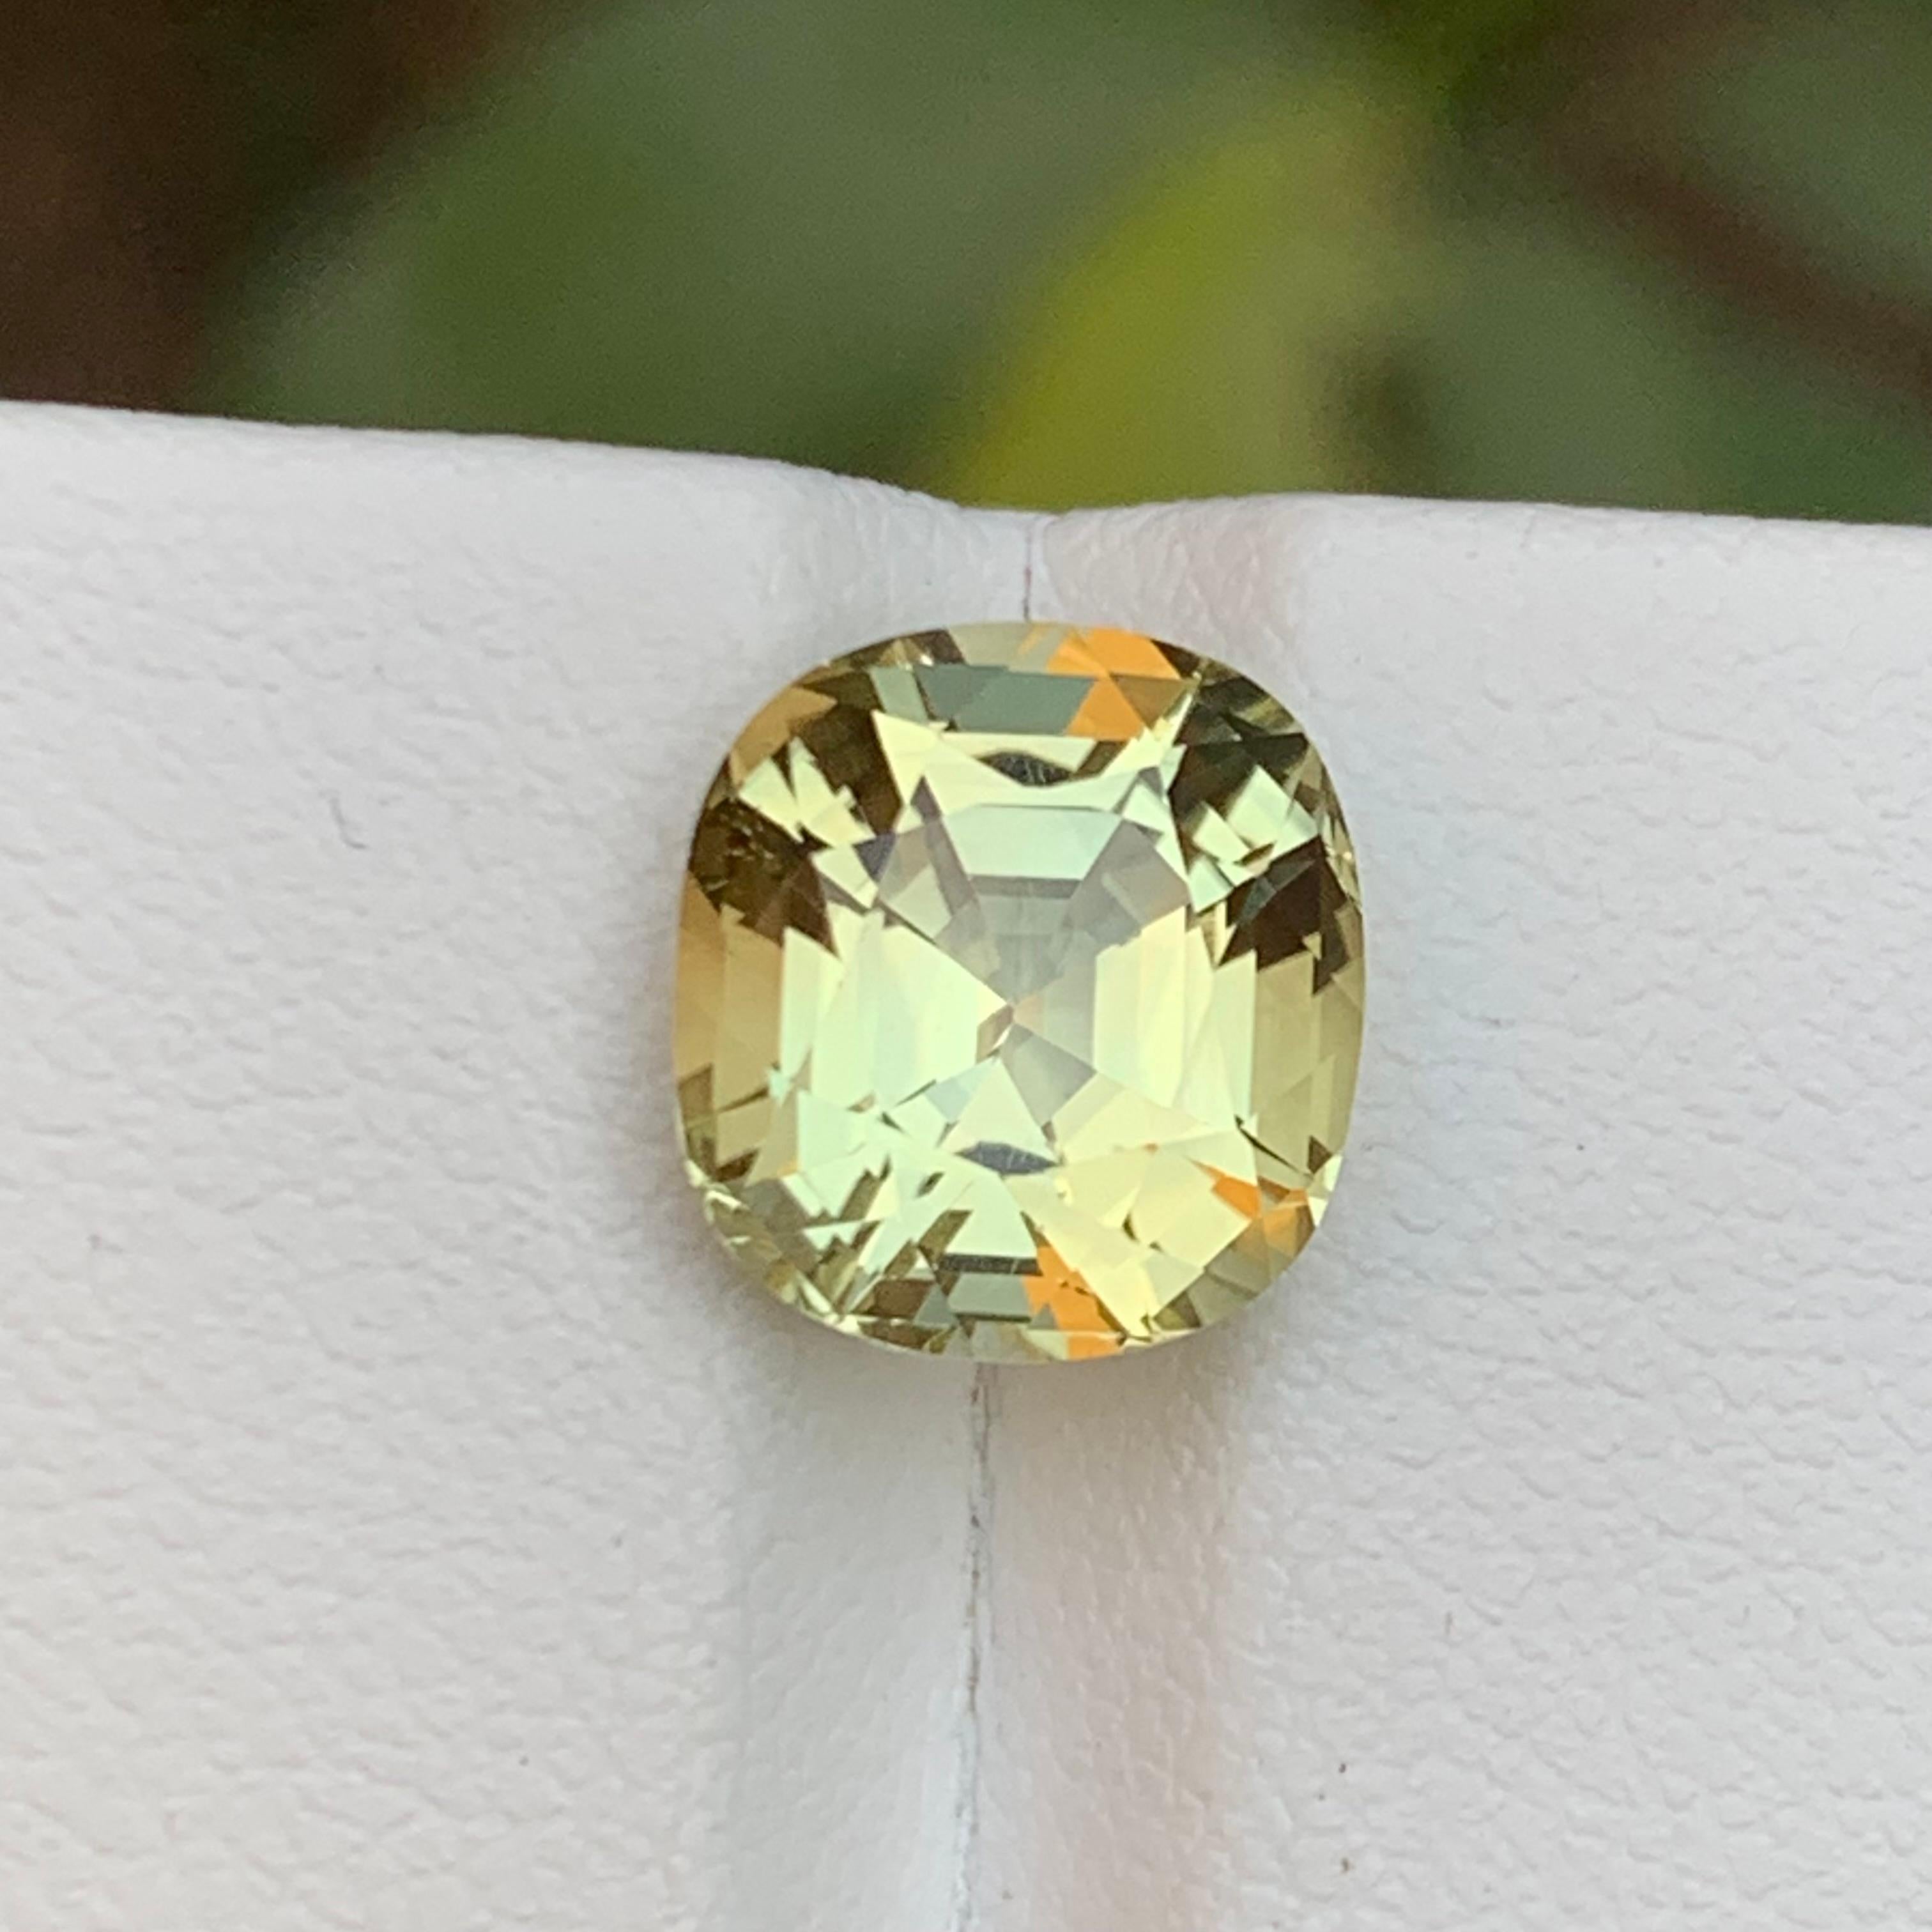 Rare Light Golden Yellow Natural Tourmaline Gemstone 4.15Ct Cushion Cut for Ring For Sale 4